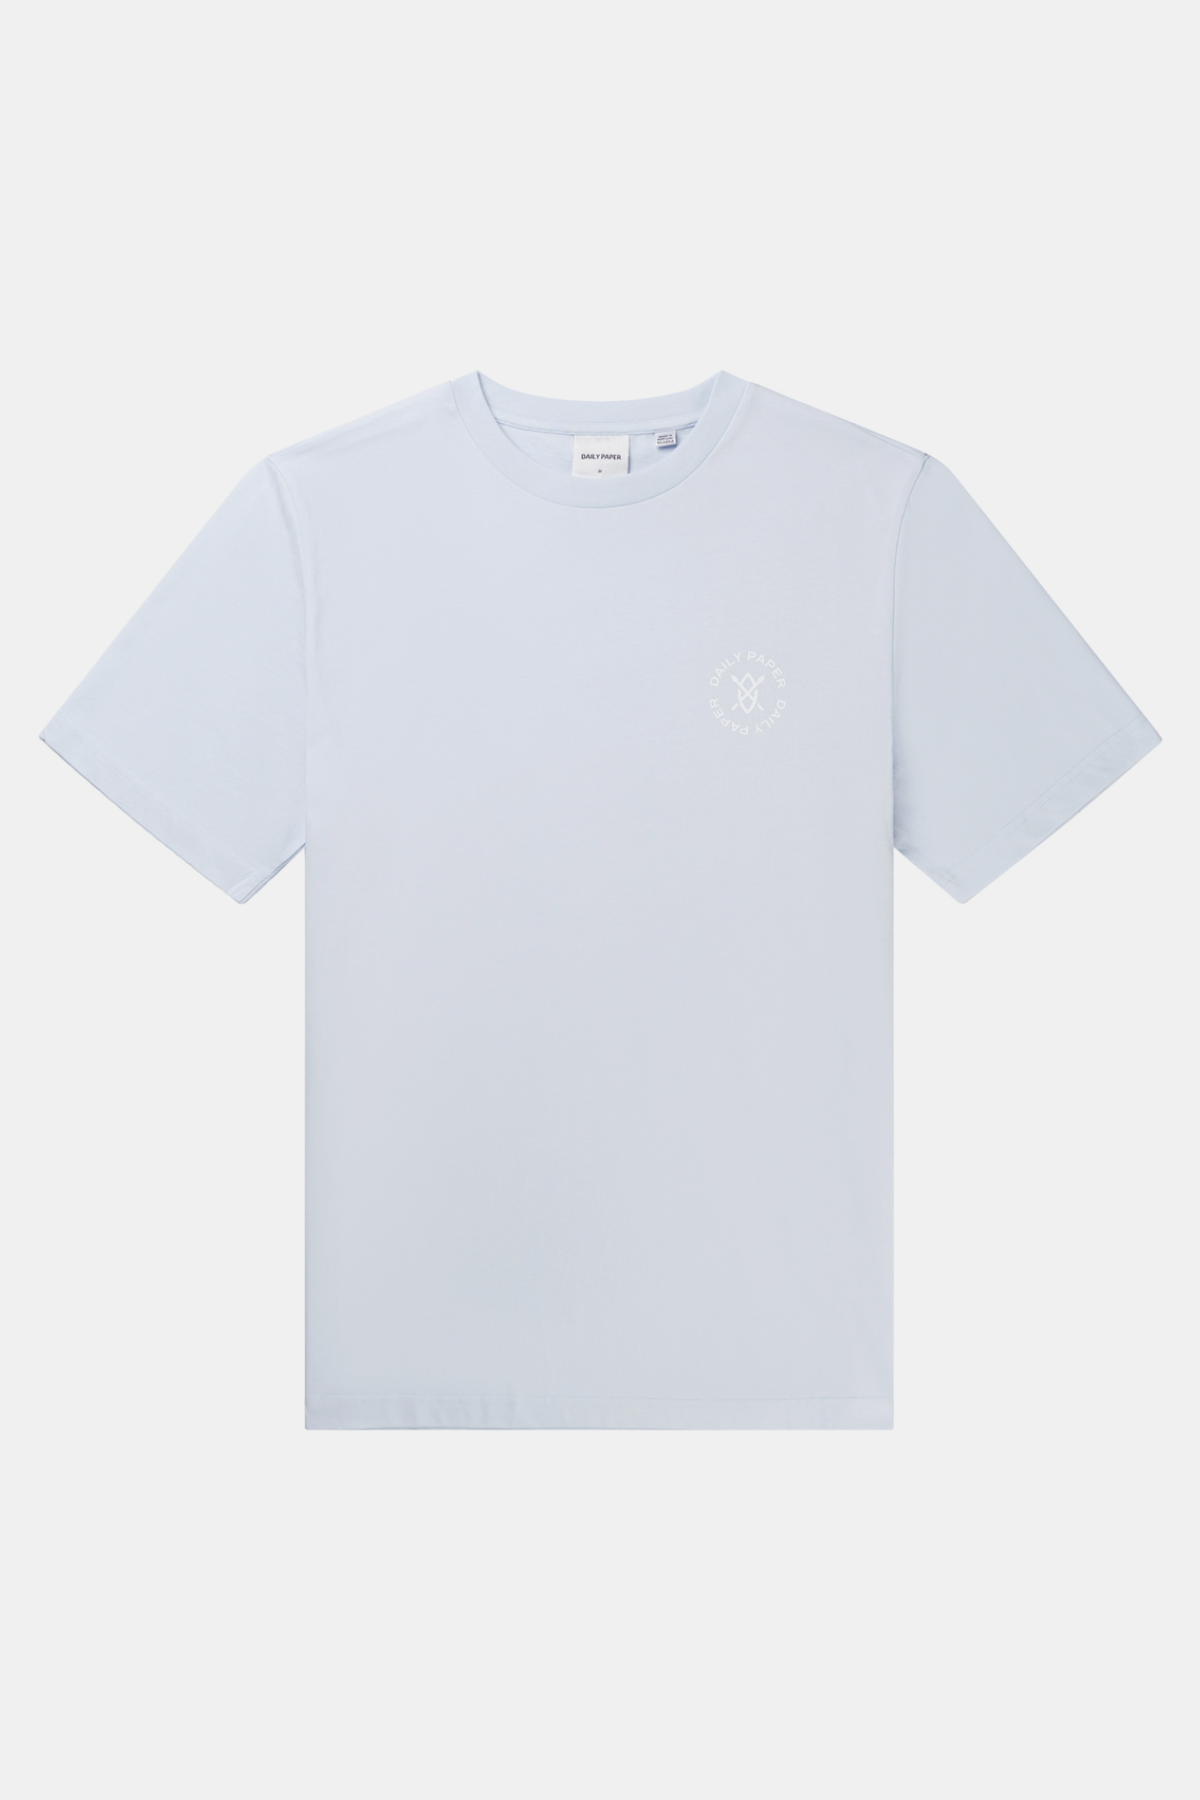 Daily Paper Circle S/S - Blue